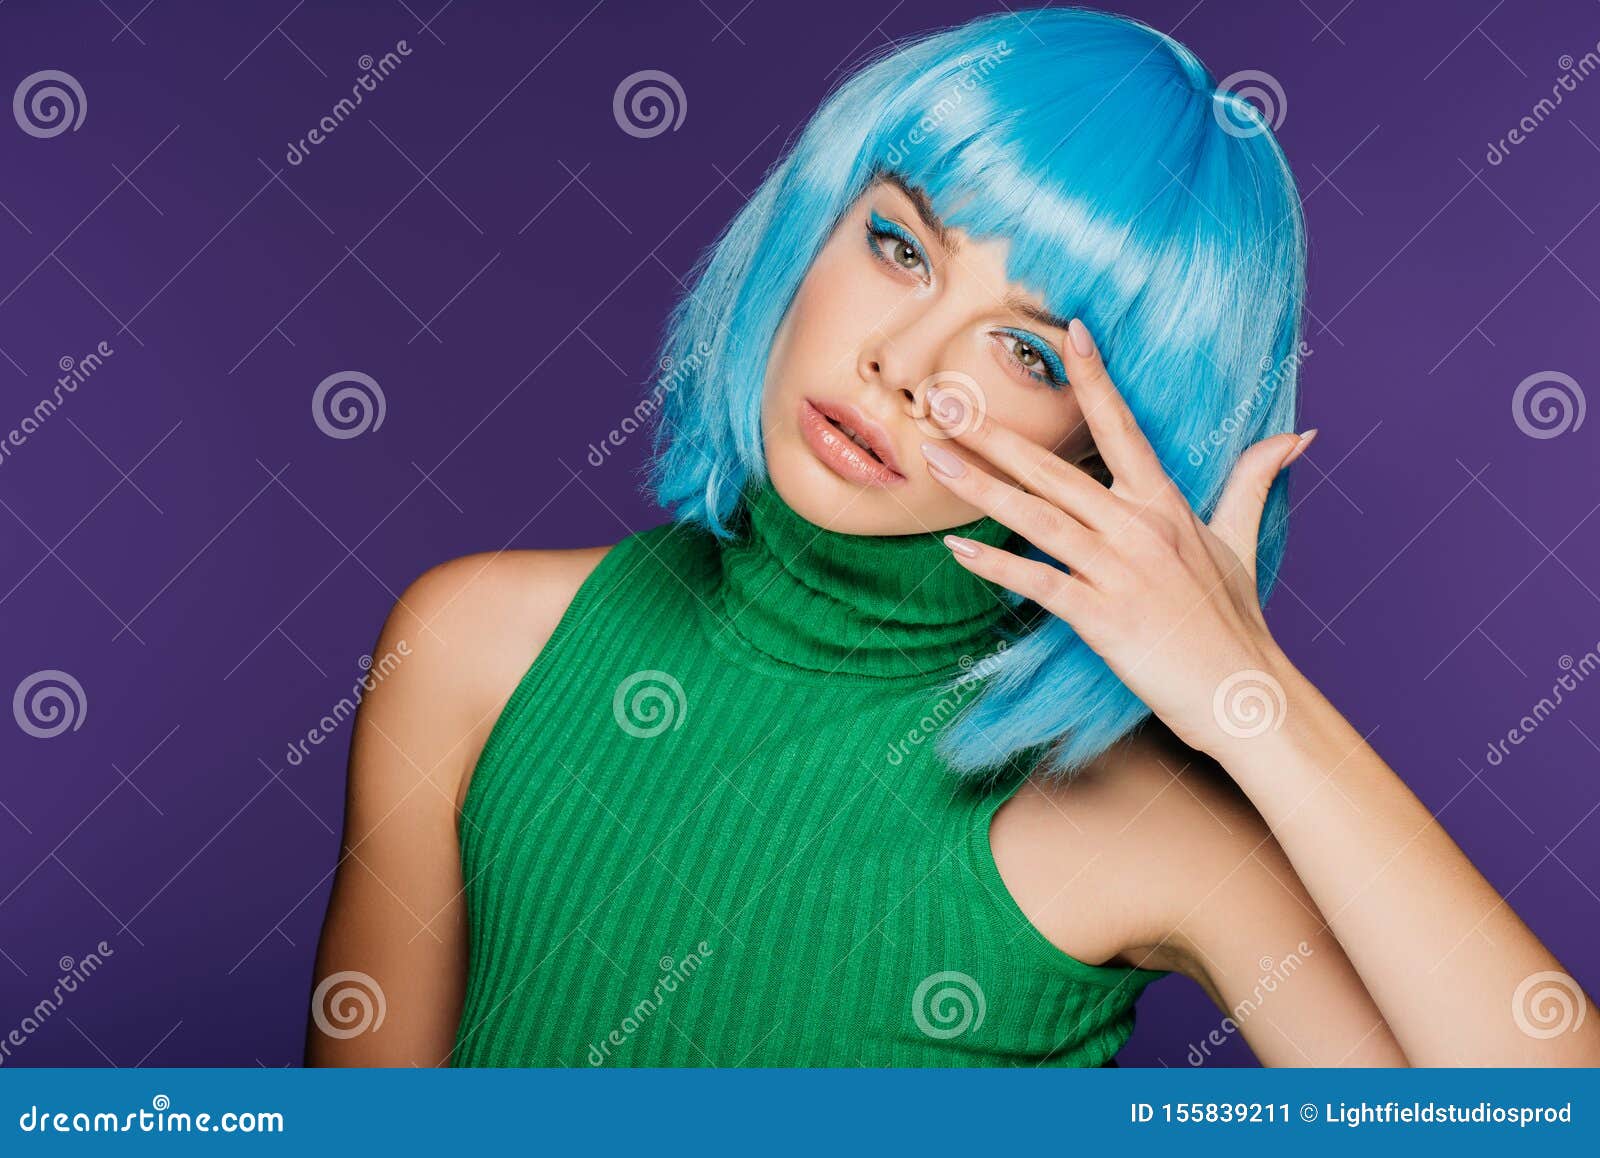 Girl with Blue Hair - Free Download - wide 7